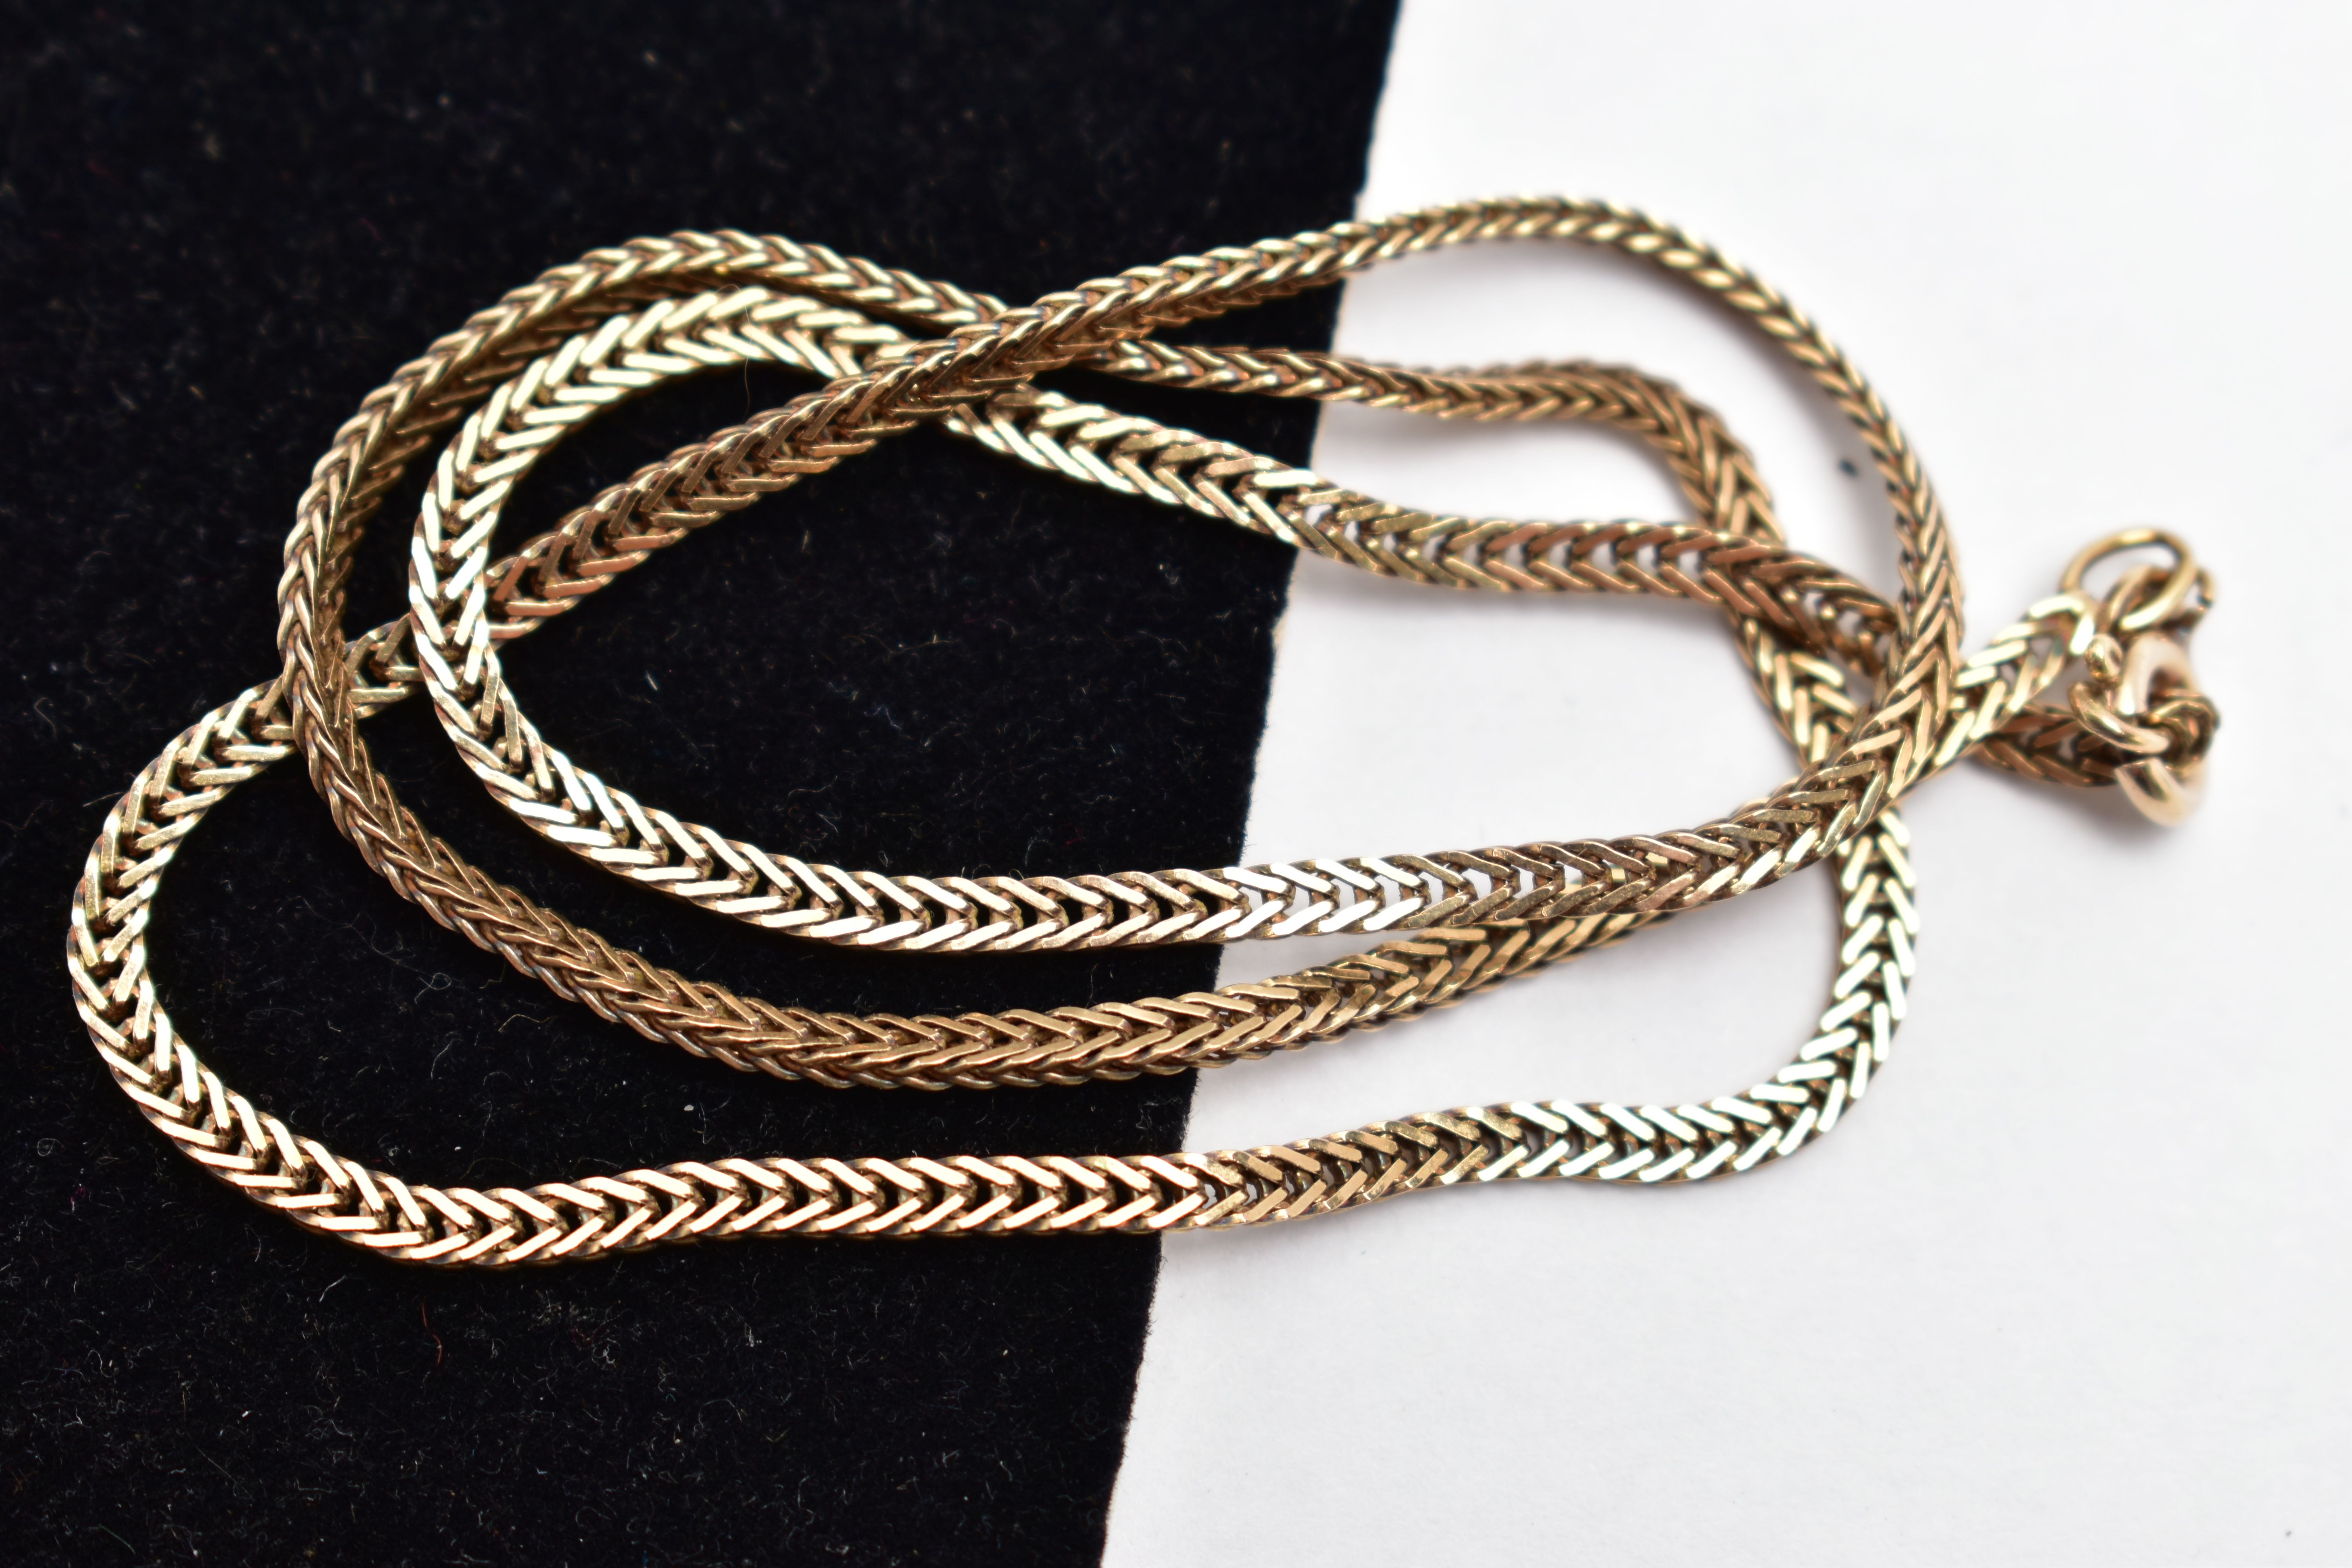 A 9CT GOLD NECKLACE, the chain comprising a series of foxtail links with lobster clasp, import - Image 2 of 2